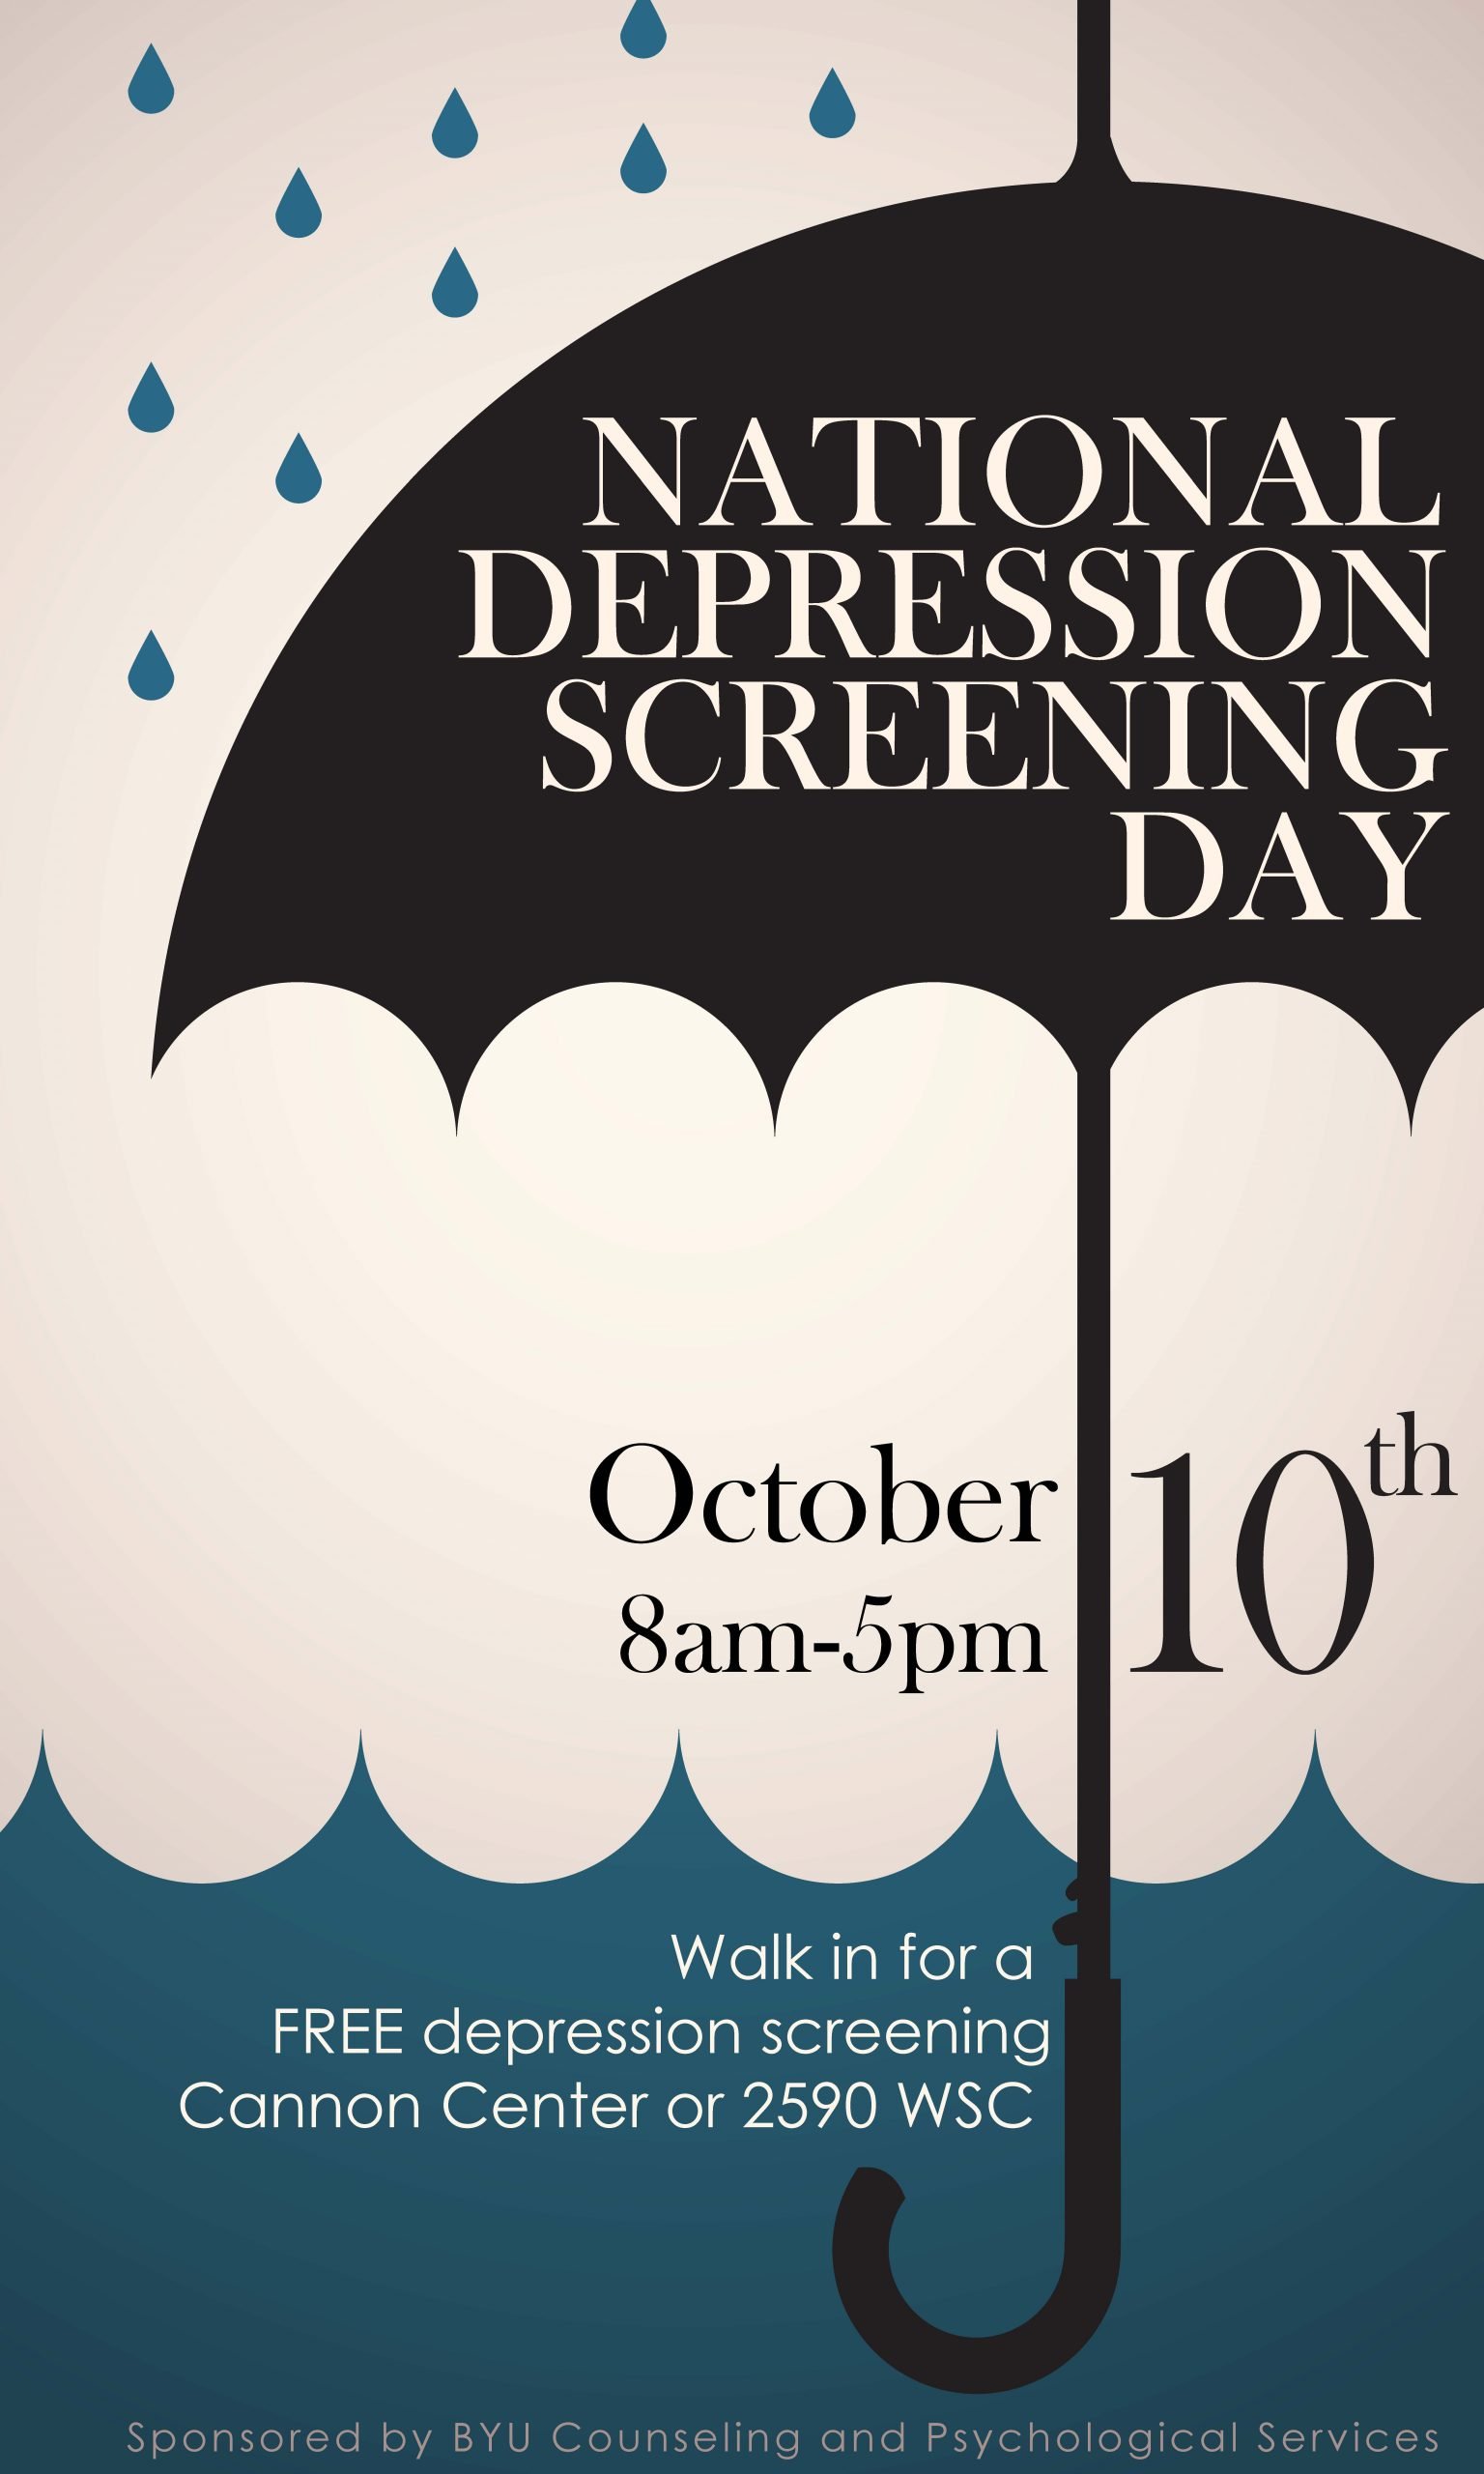 National Depression Screening Day slated for Oct.10